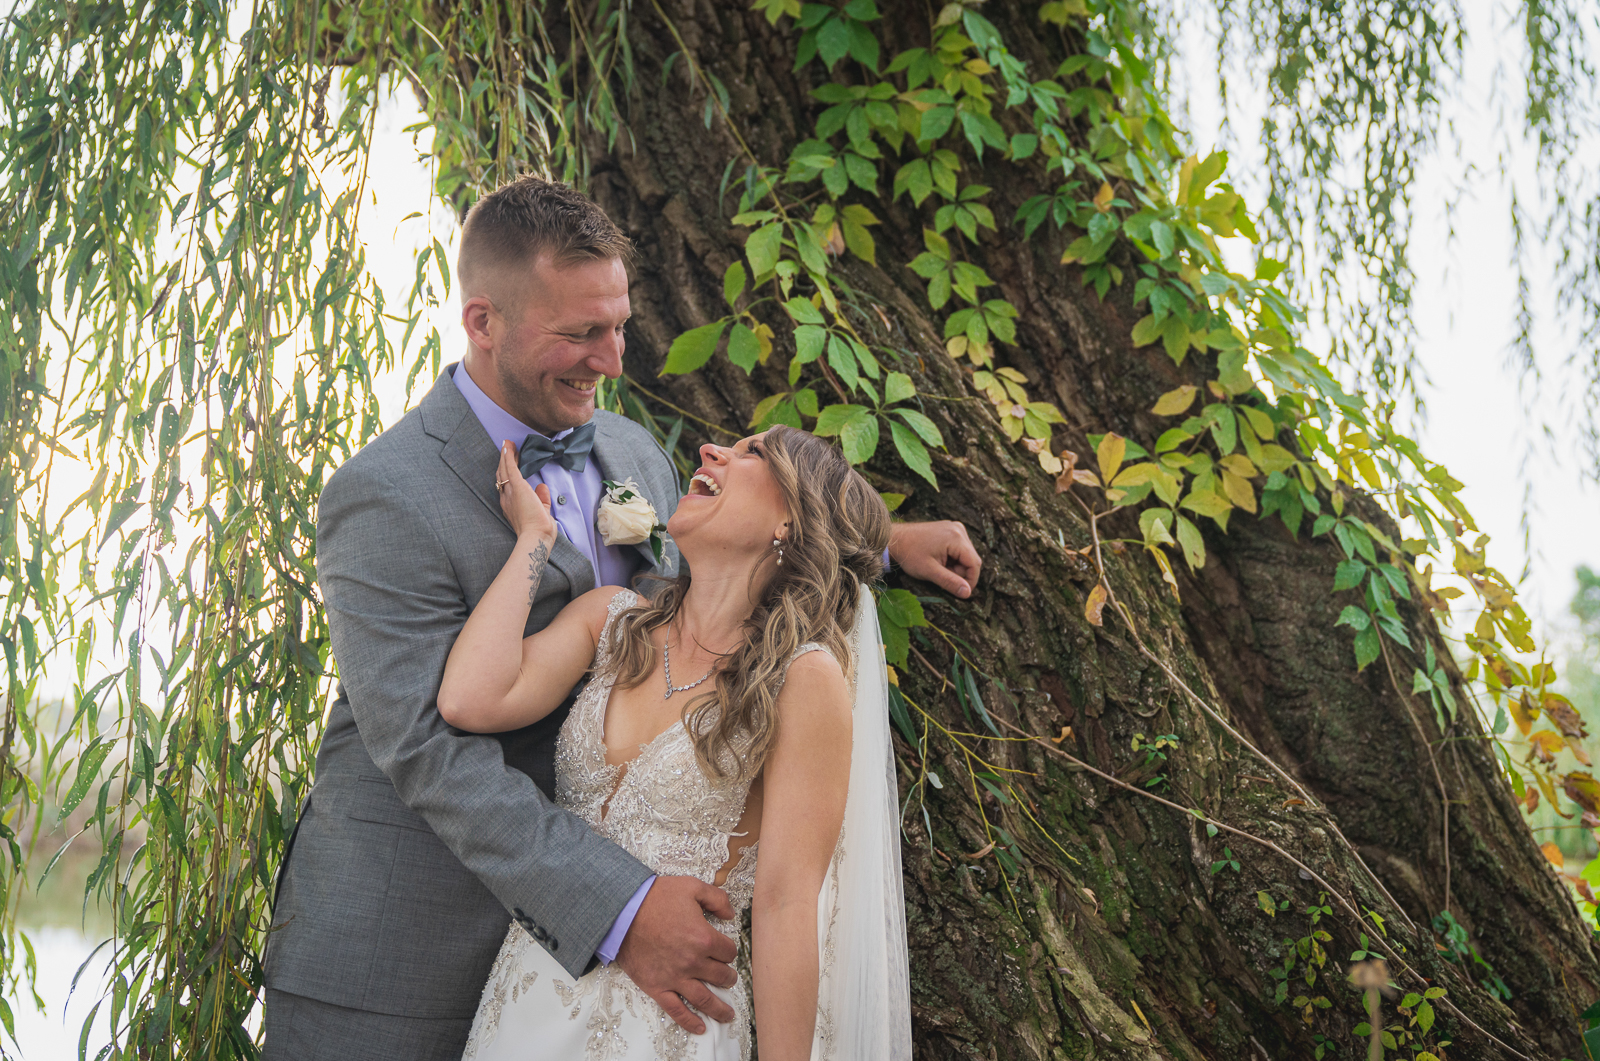 Bride and groom wedding portrait, smiling, laughing, weeping willow, tree, nature, fall wedding, rustic outdoor wedding ceremony at White Birch Barn